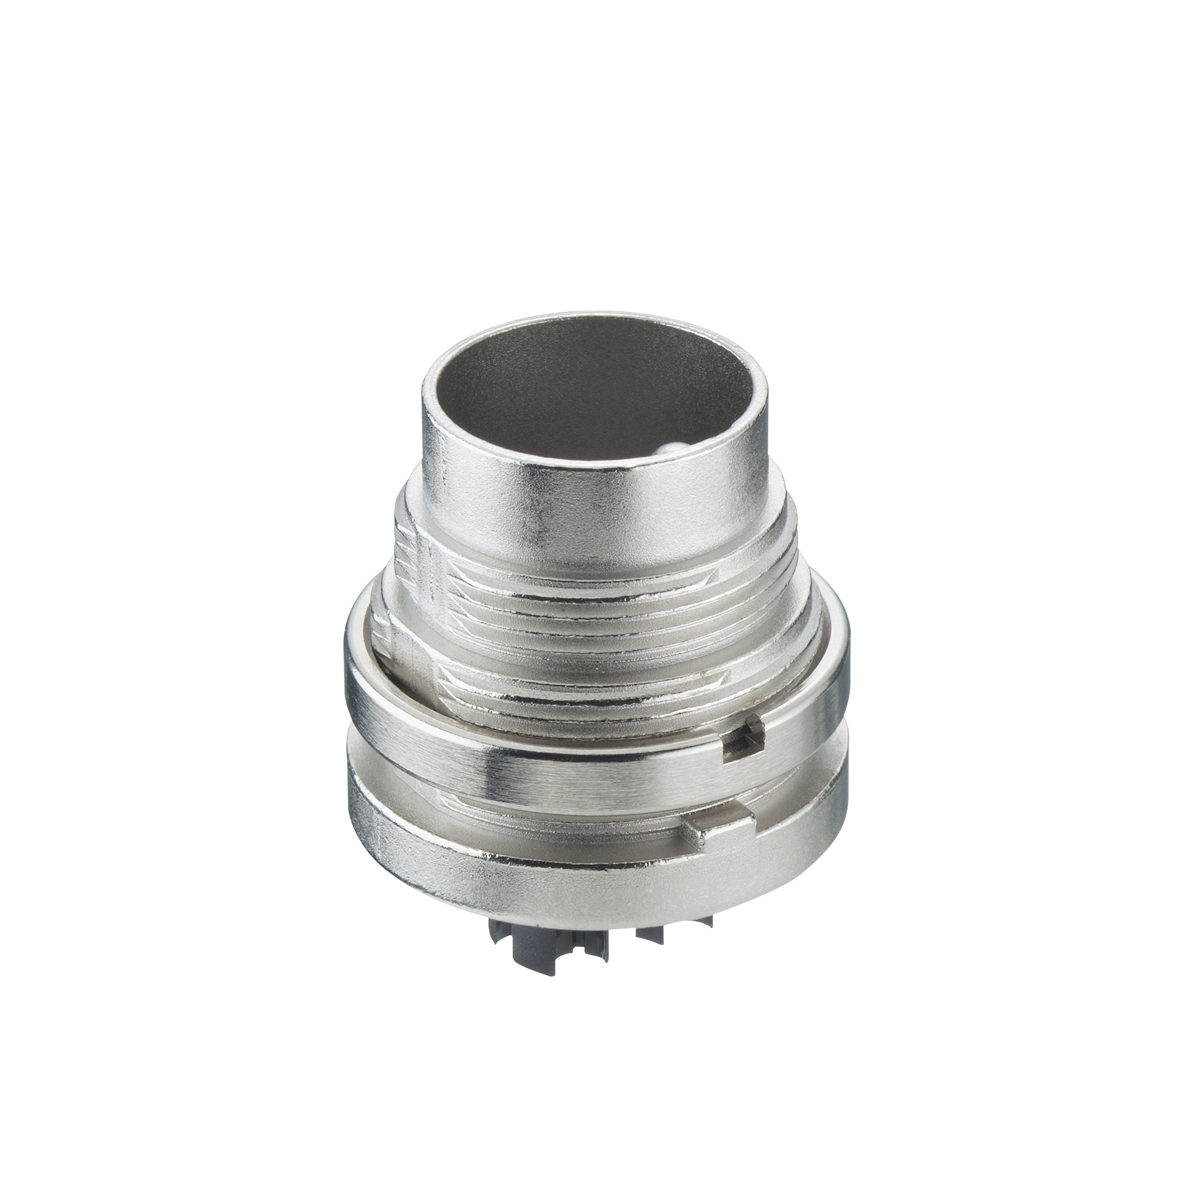 Lumberg: SGV ... C (Series 03 | Circular connectors with threaded joint M16 acc. to IEC 61076-2-106, IP40/IP68)